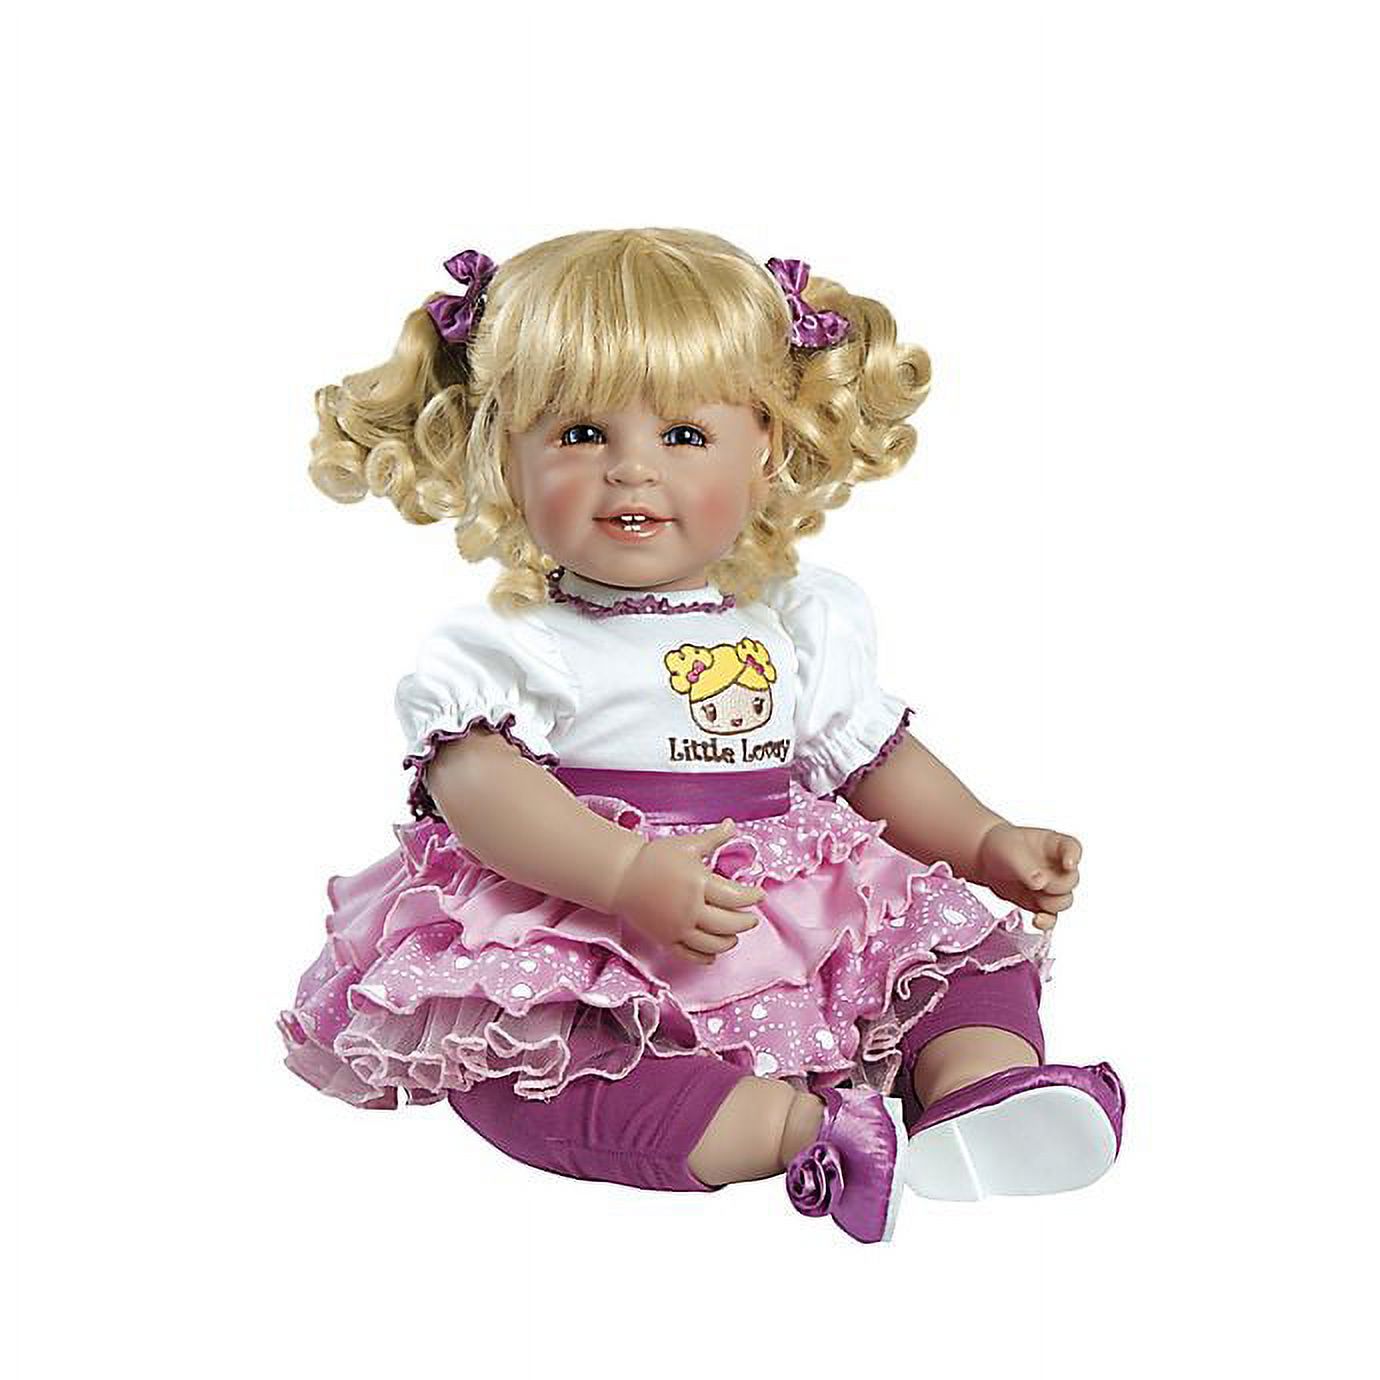 Adora Little Lovey Realistic Doll with Hand Sewn Fashions - image 1 of 9